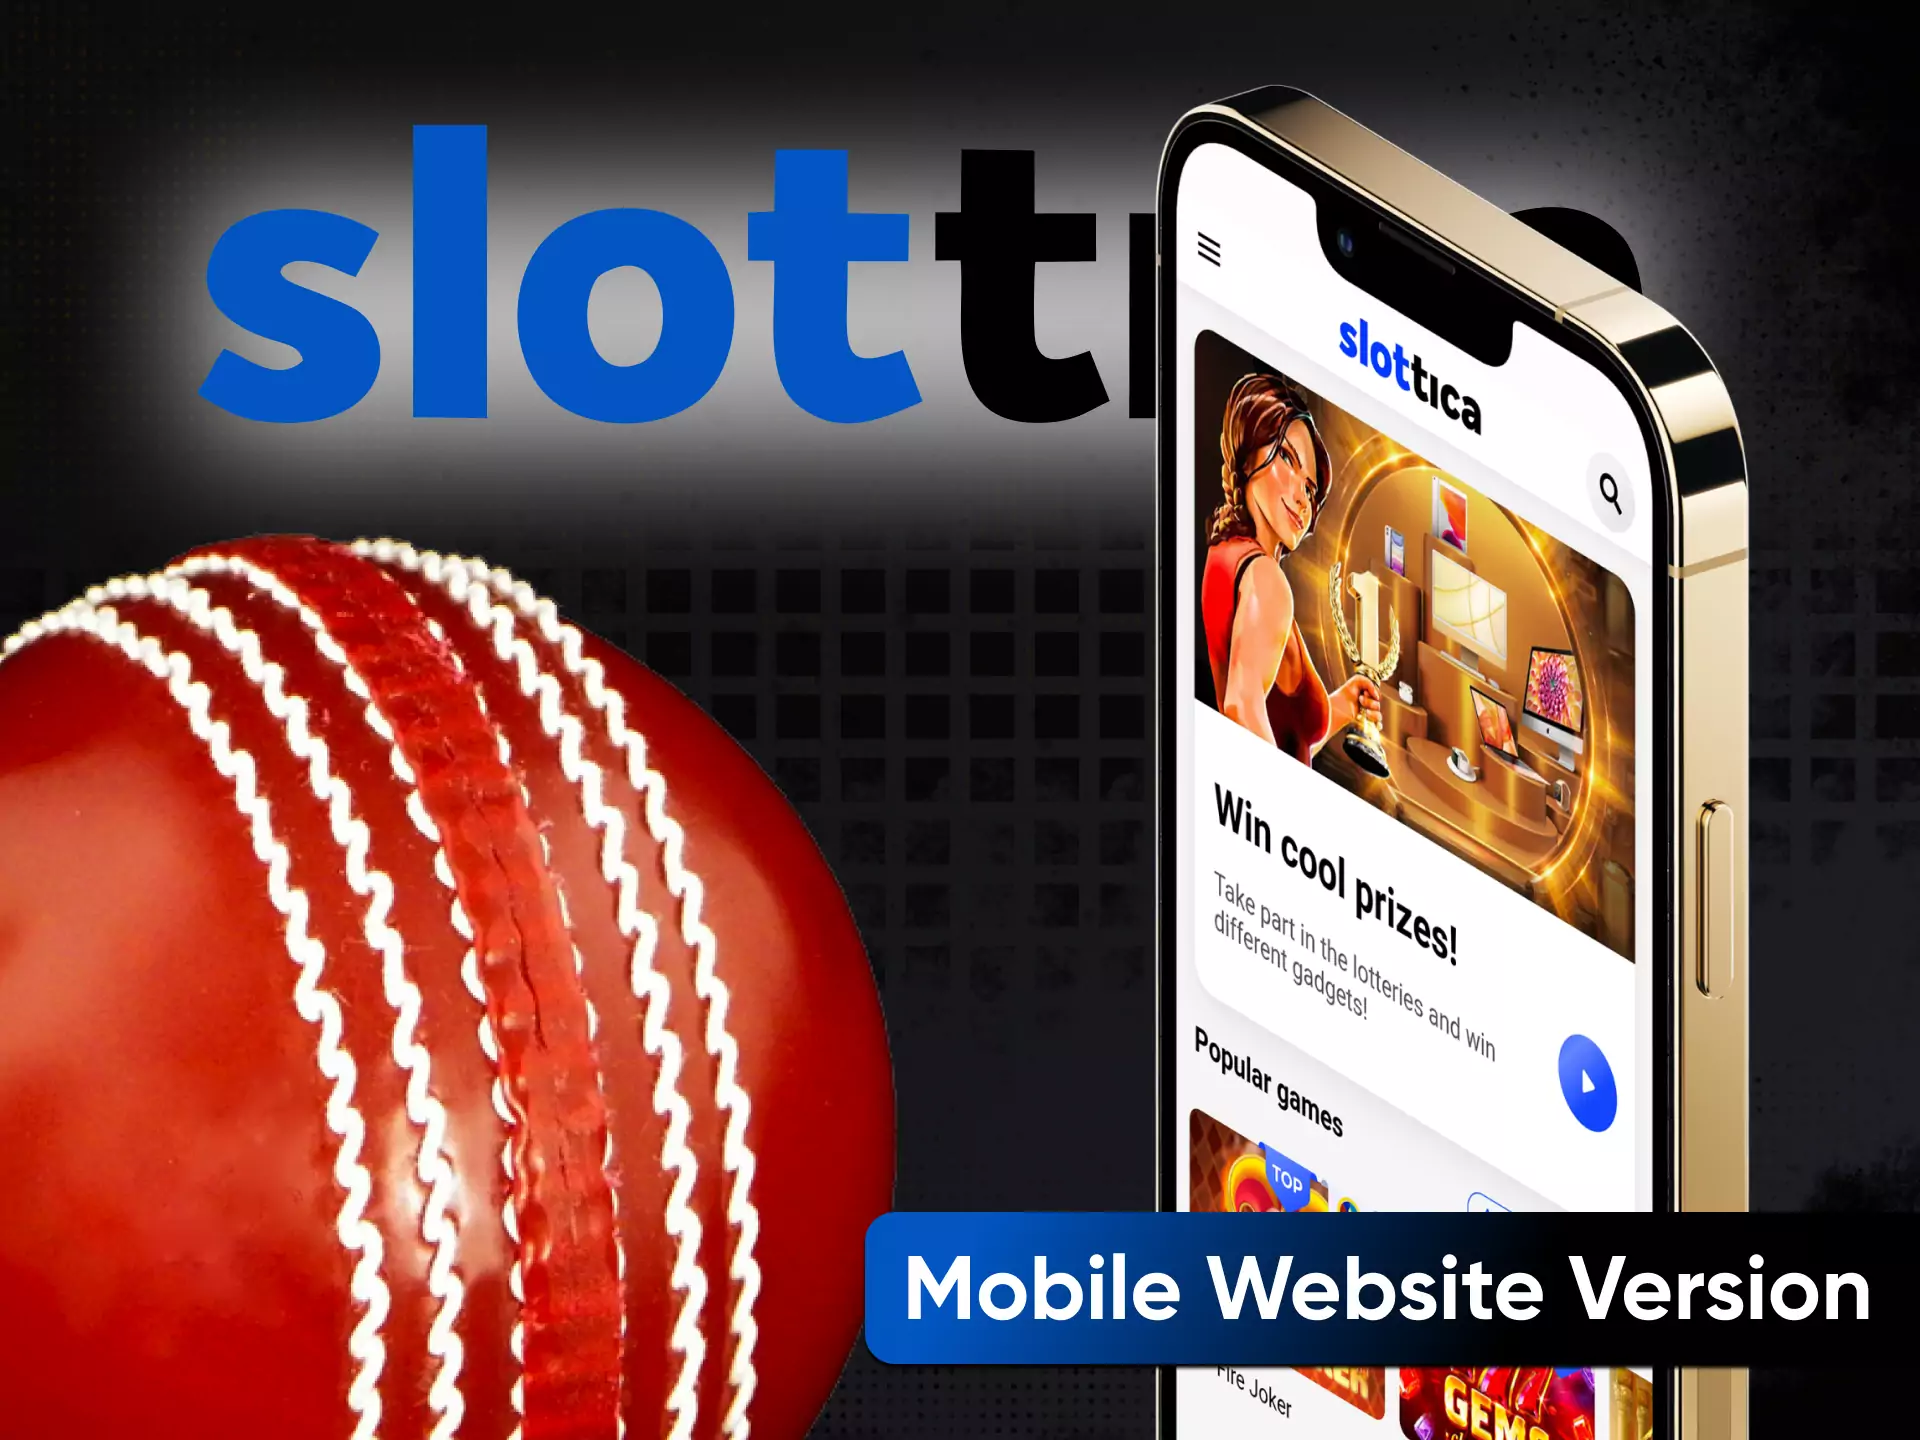 On the Slottica website, there is also a mobile version for smartphones.